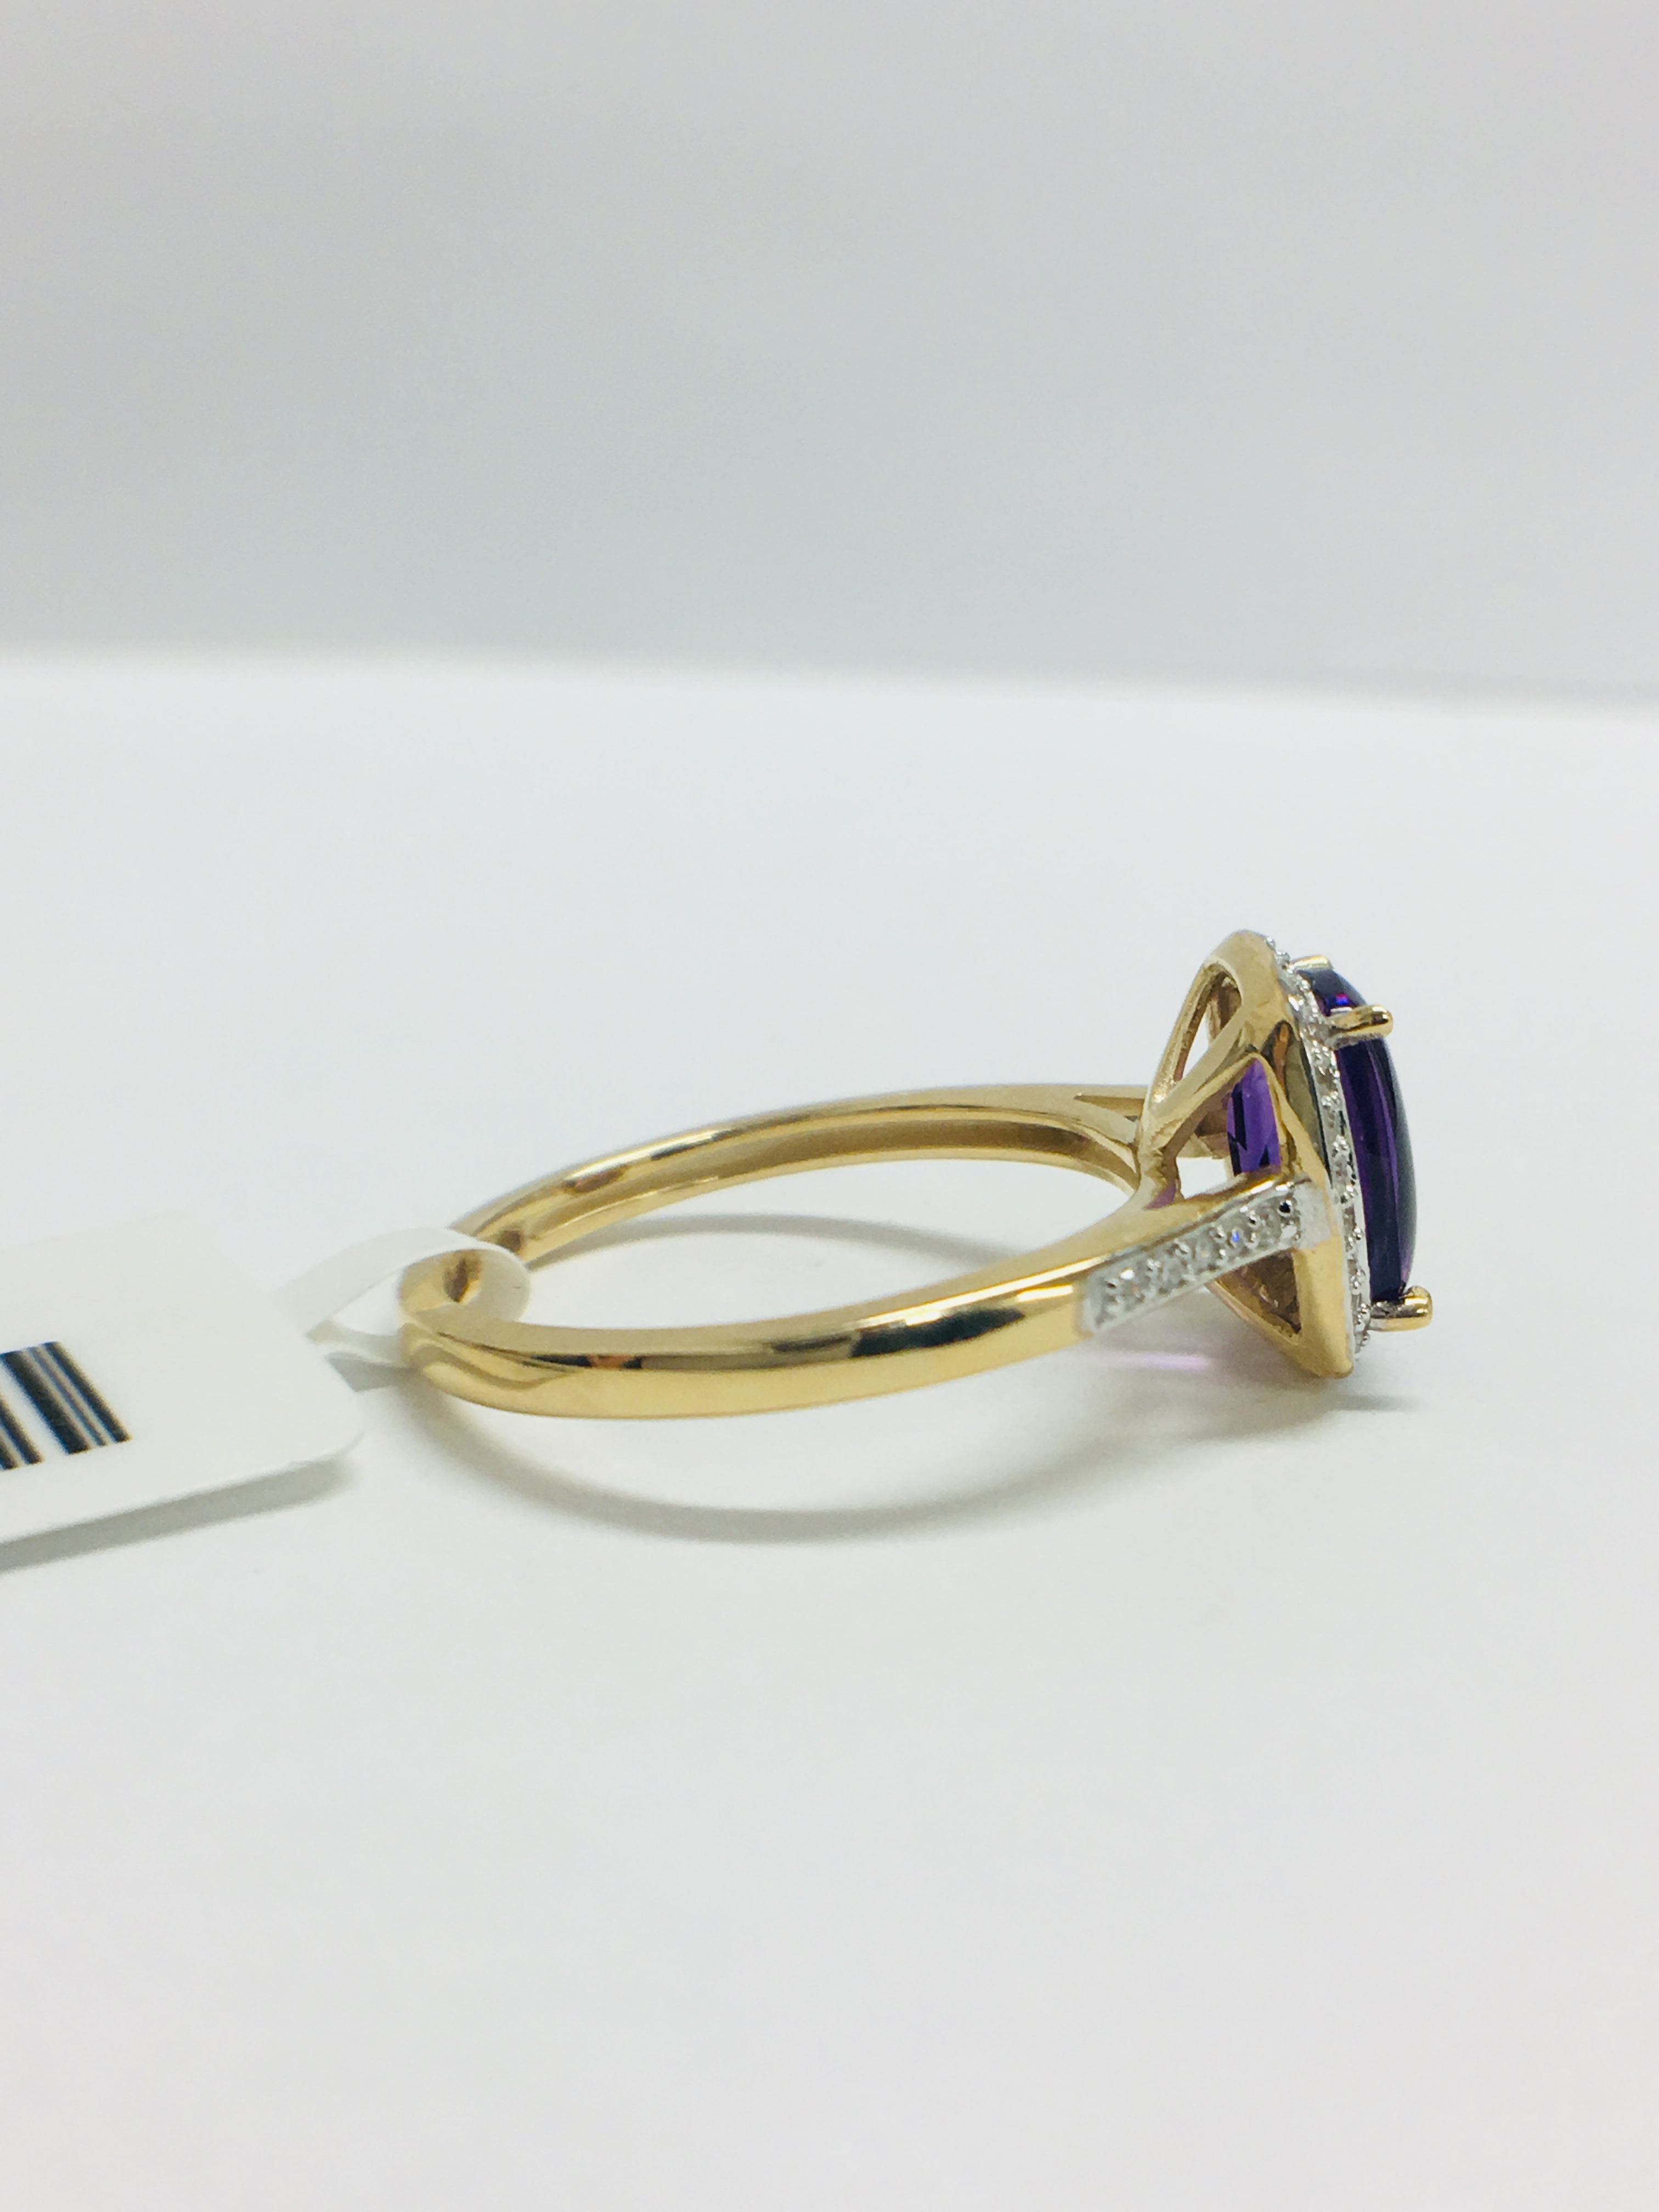 9ct yellow gold Amethyst and diamond ring - Image 7 of 11